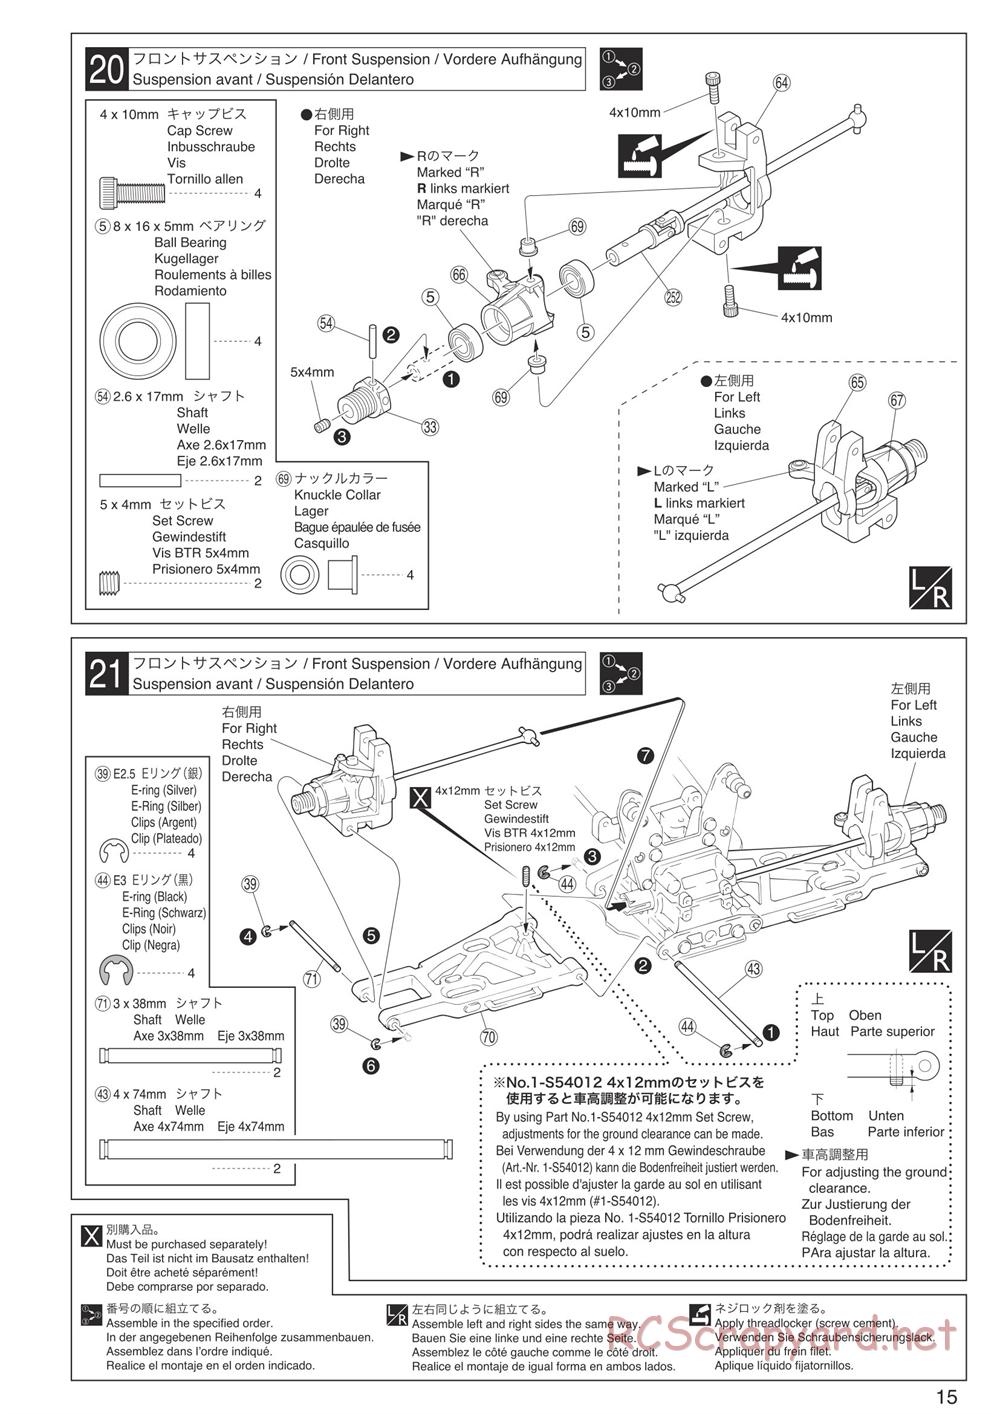 Kyosho - Inferno Neo Race Spec - Manual - Page 15